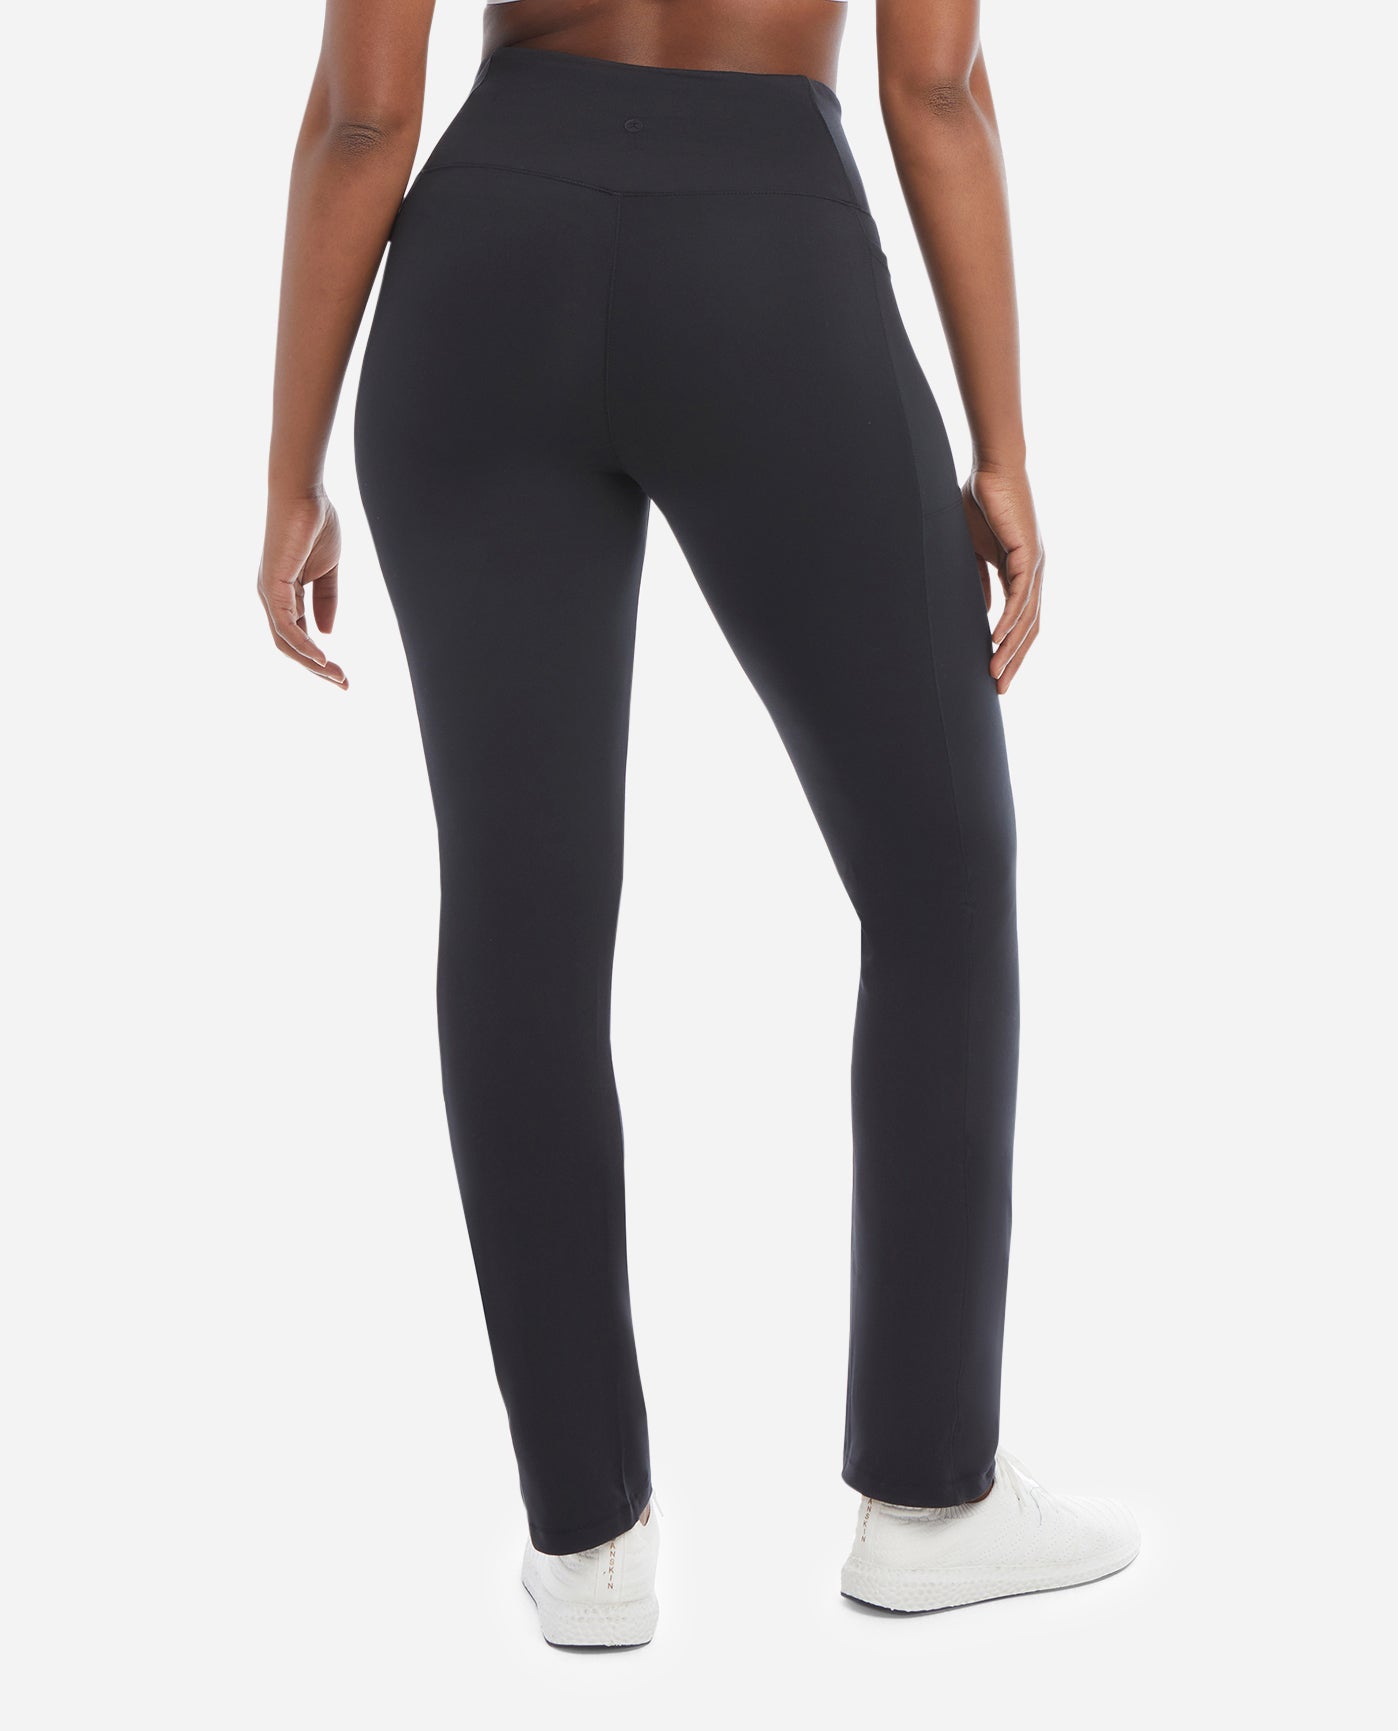 Flared Yoga Pants To Shop Now